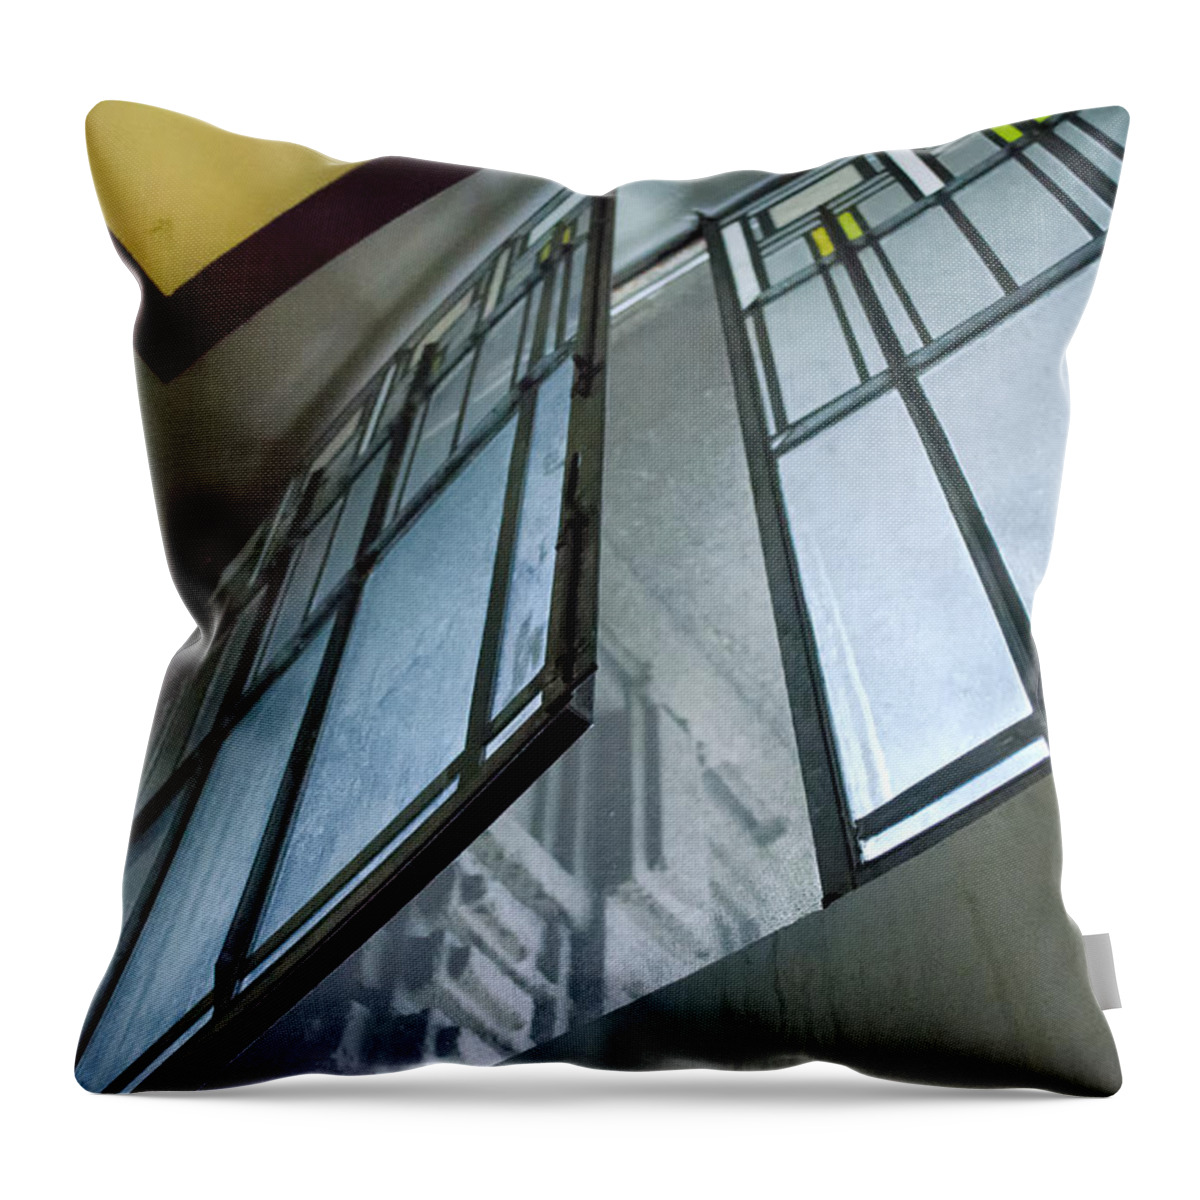 Architecture Throw Pillow featuring the photograph Frank Lloyd Wright's Open Window by Jim Shackett